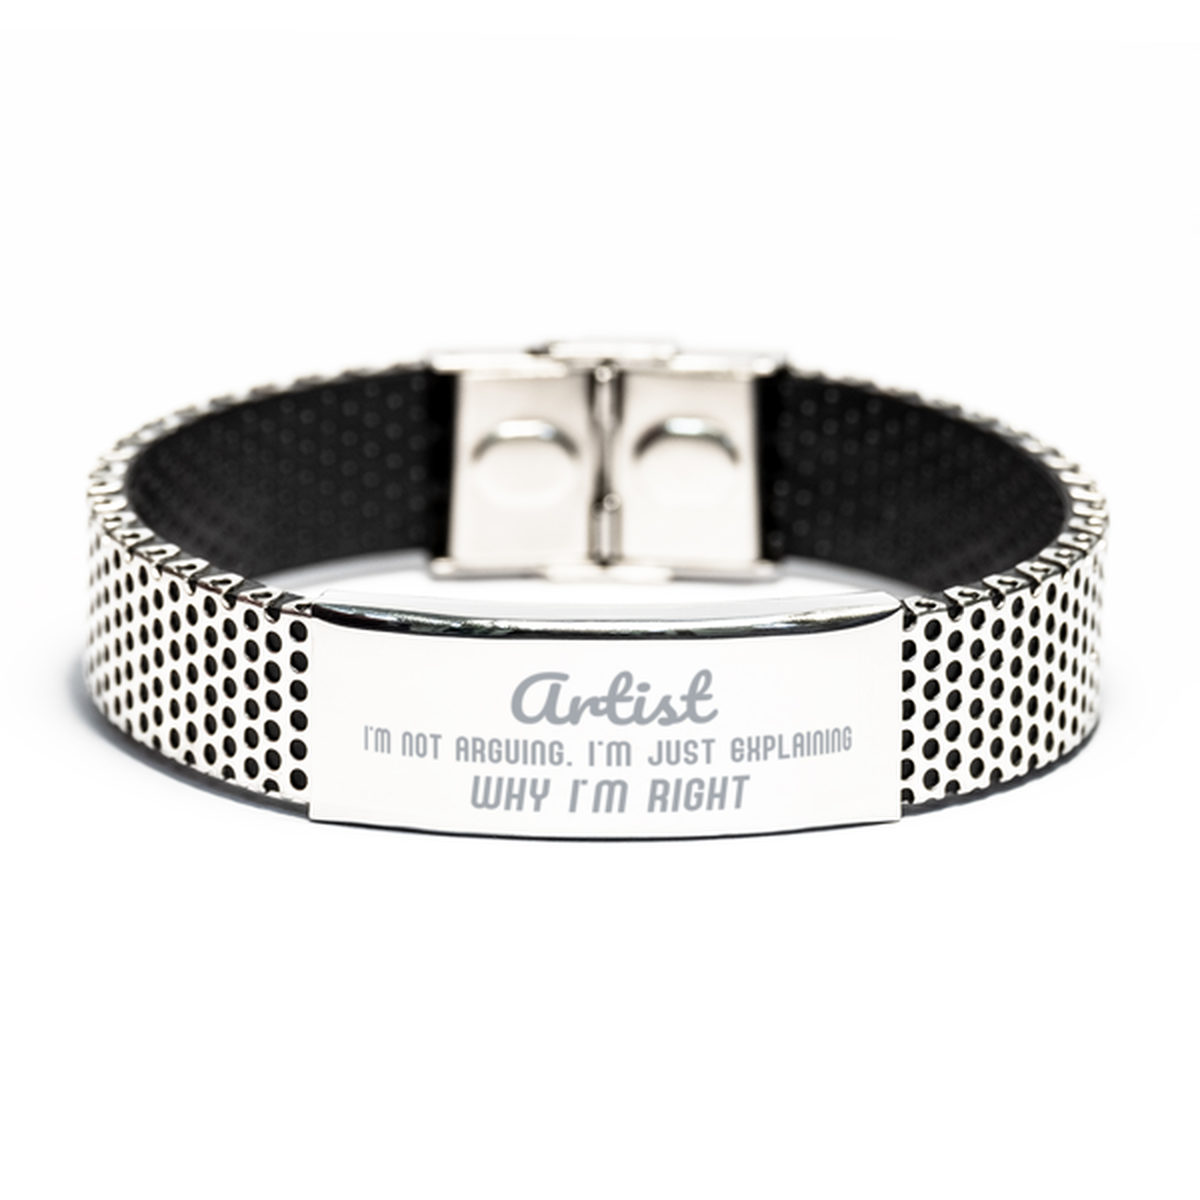 Artist I'm not Arguing. I'm Just Explaining Why I'm RIGHT Stainless Steel Bracelet, Funny Saying Quote Artist Gifts For Artist Graduation Birthday Christmas Gifts for Men Women Coworker